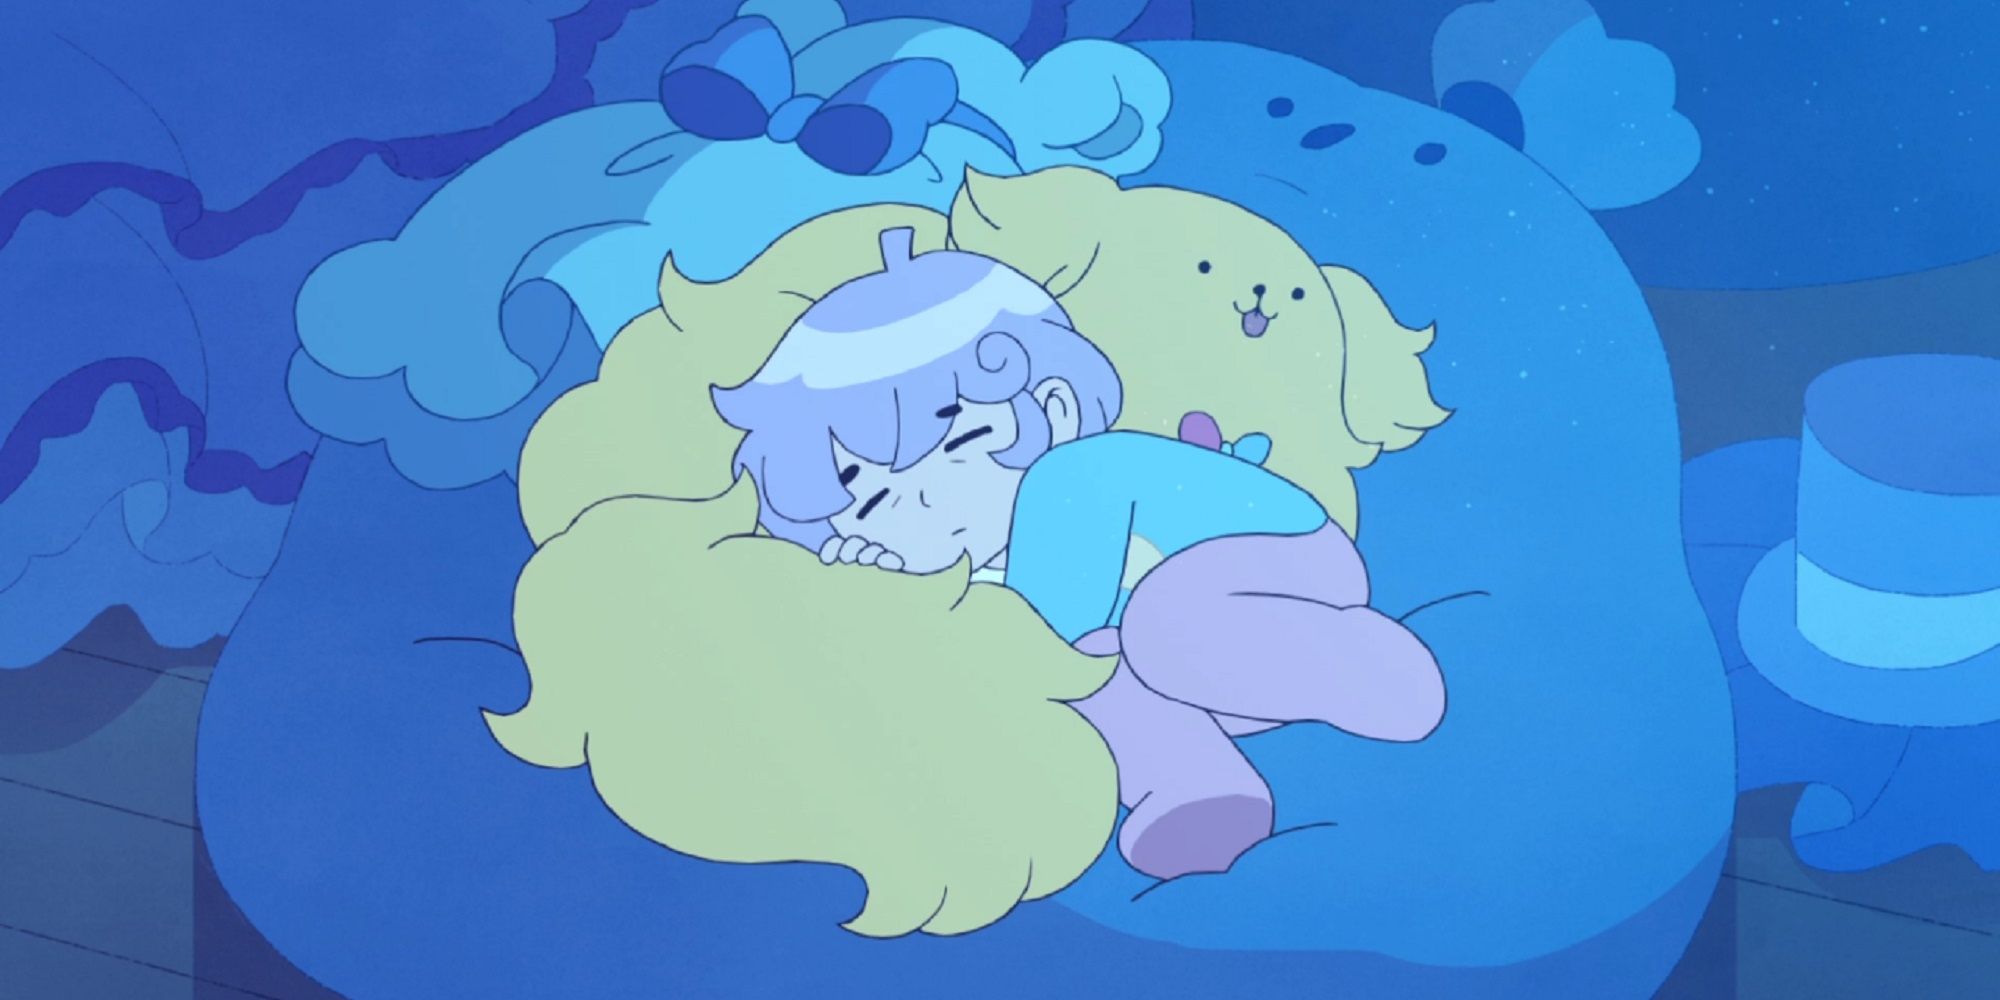 Cardamon snuggling on a bed in 'Bee and PuppyCat.'